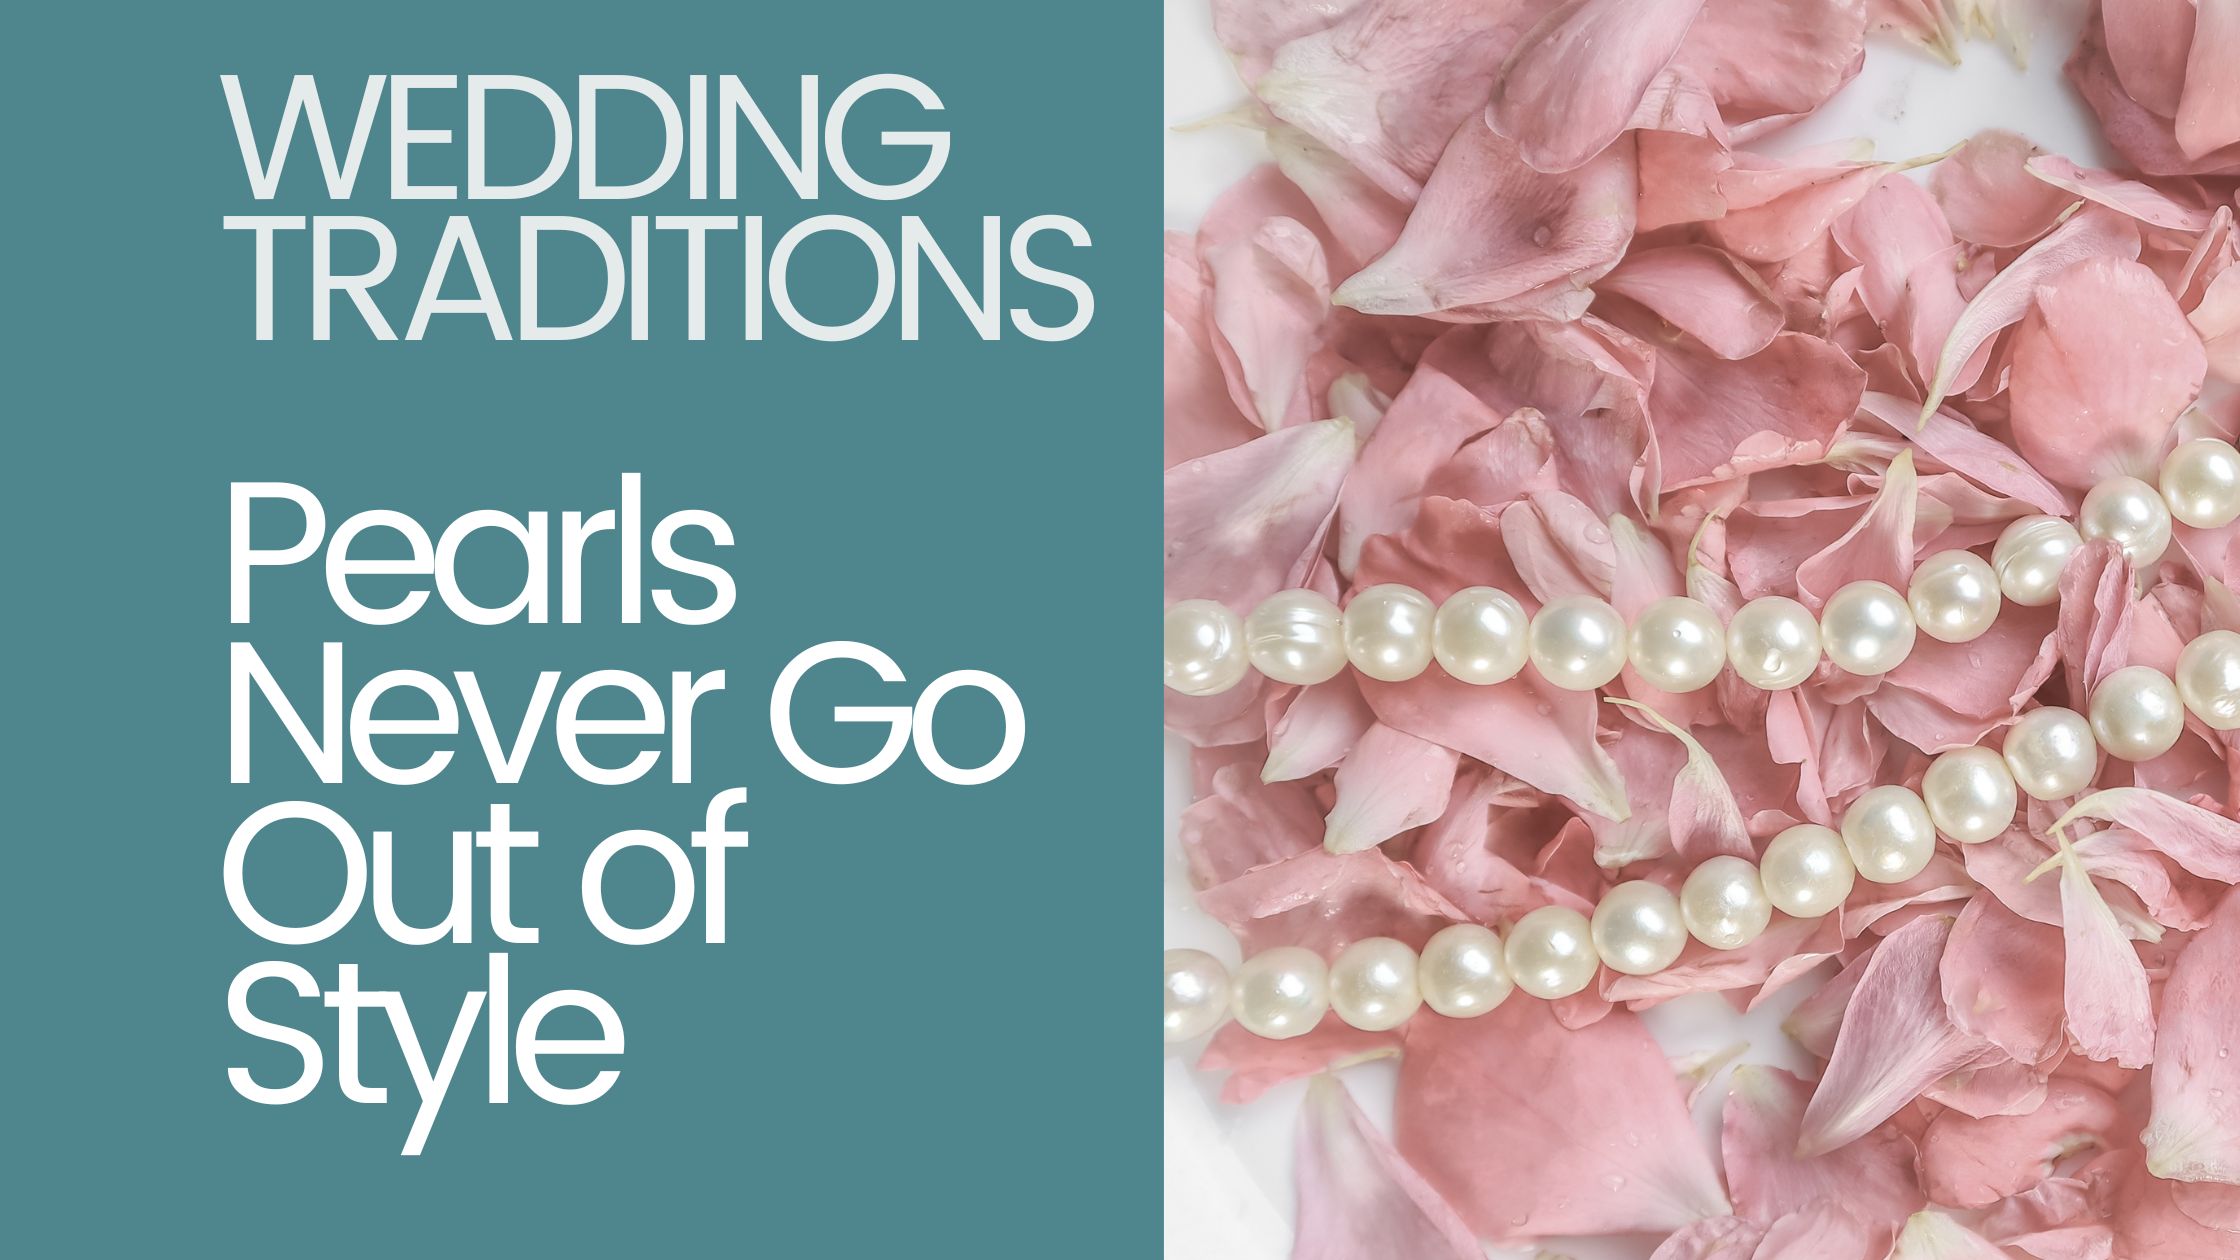 Wedding Traditions: Pearls Never Go Out of Style